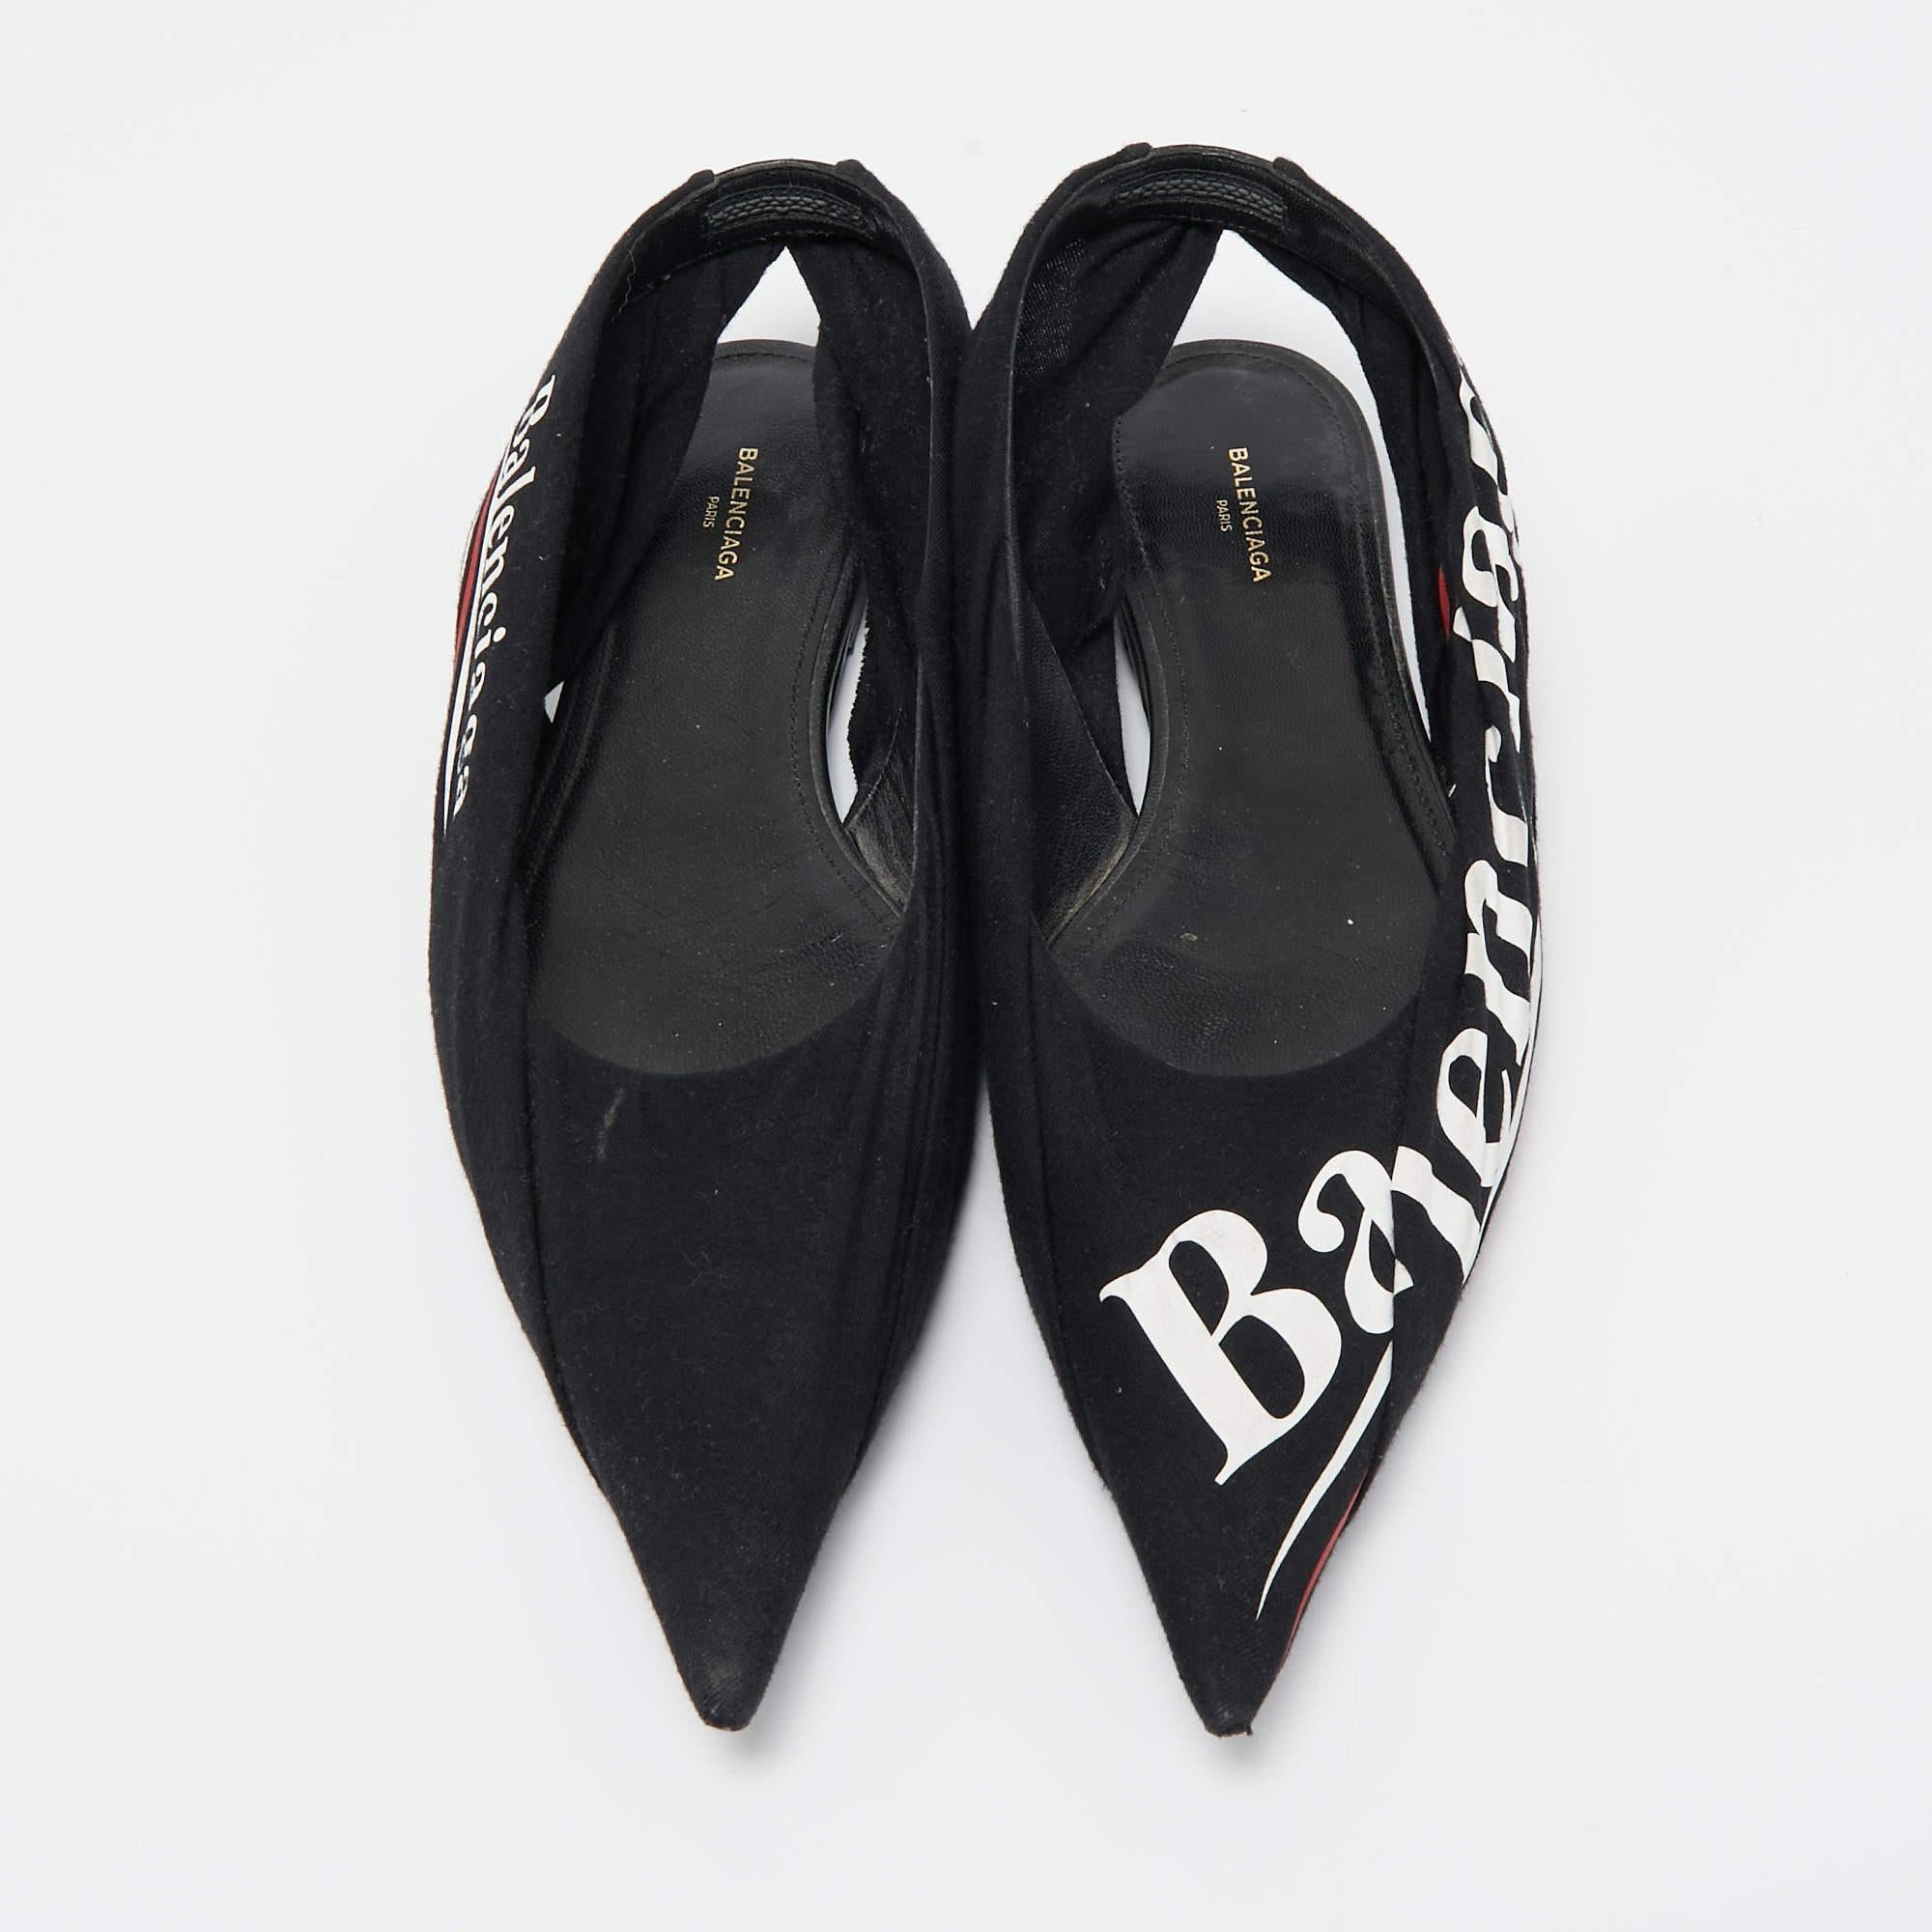 Step into sophistication and comfort with these Balenciaga slingback flats for women. Exquisitely crafted, these versatile shoes blend timeless elegance with everyday ease, ensuring a stylish and relaxed stride.

Includes: Original Box

